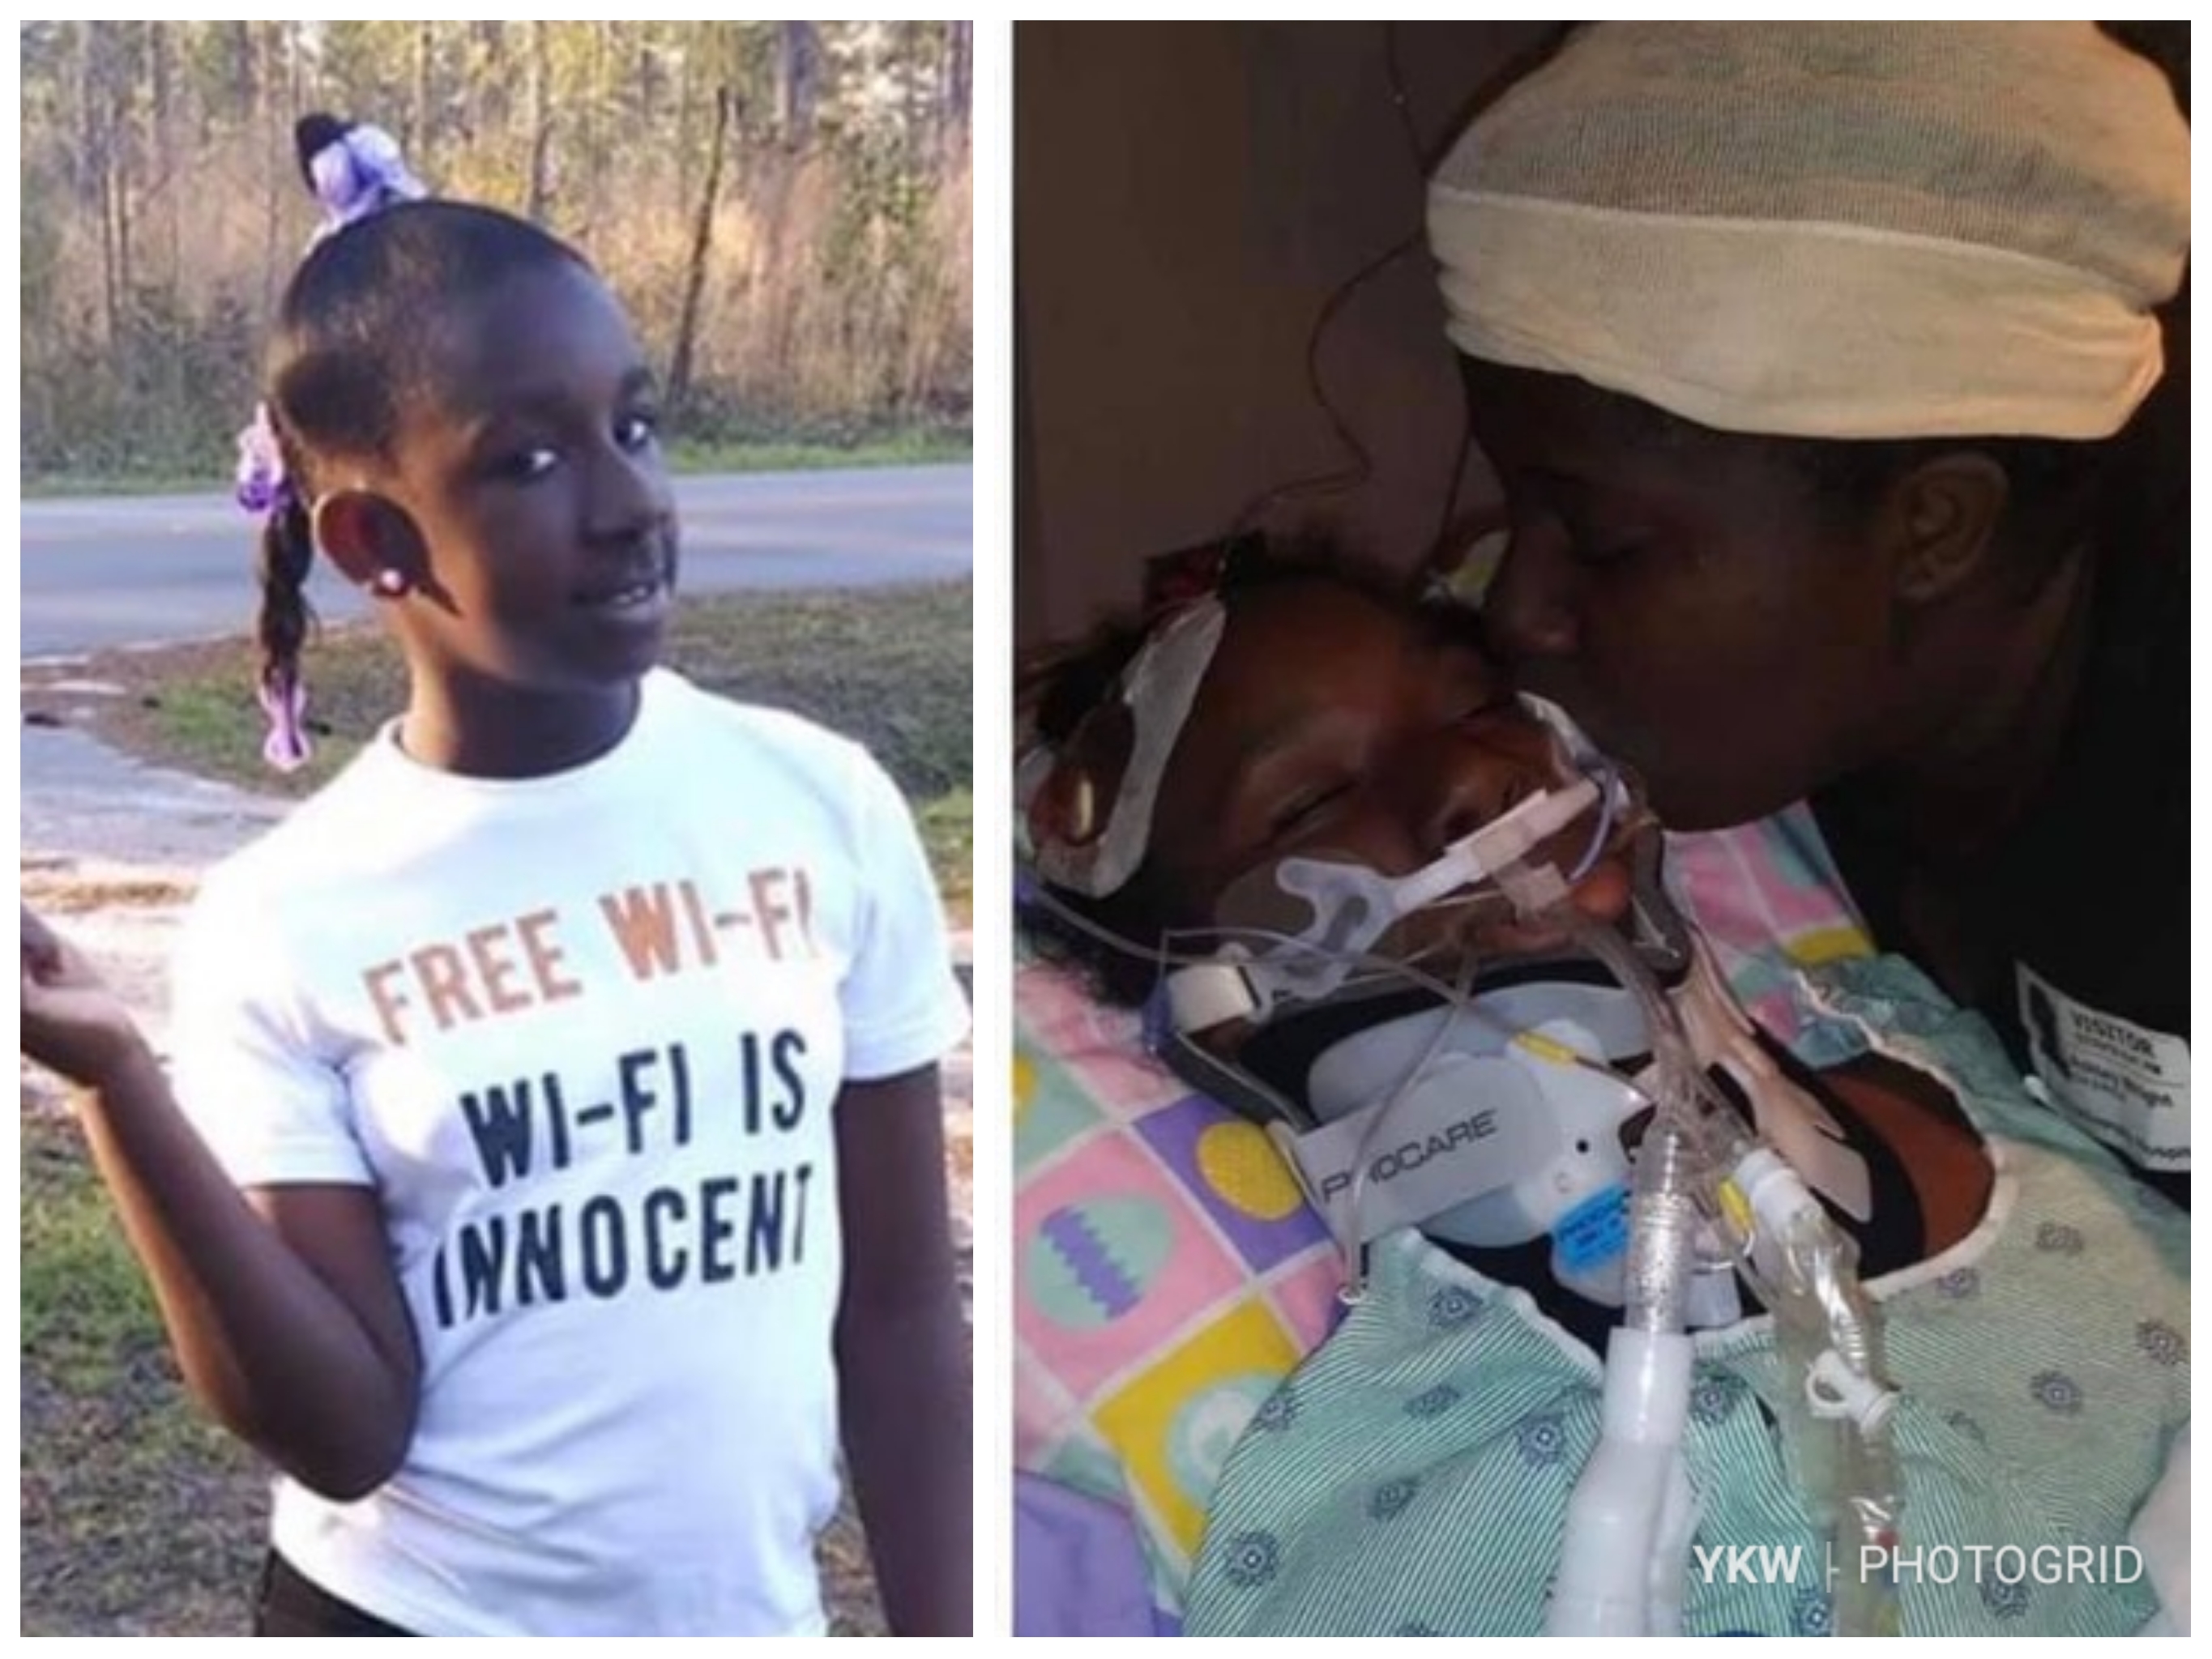 A 10-Year Old South Carolina Girl Dies After Being Severely Beaten In Her Classroom